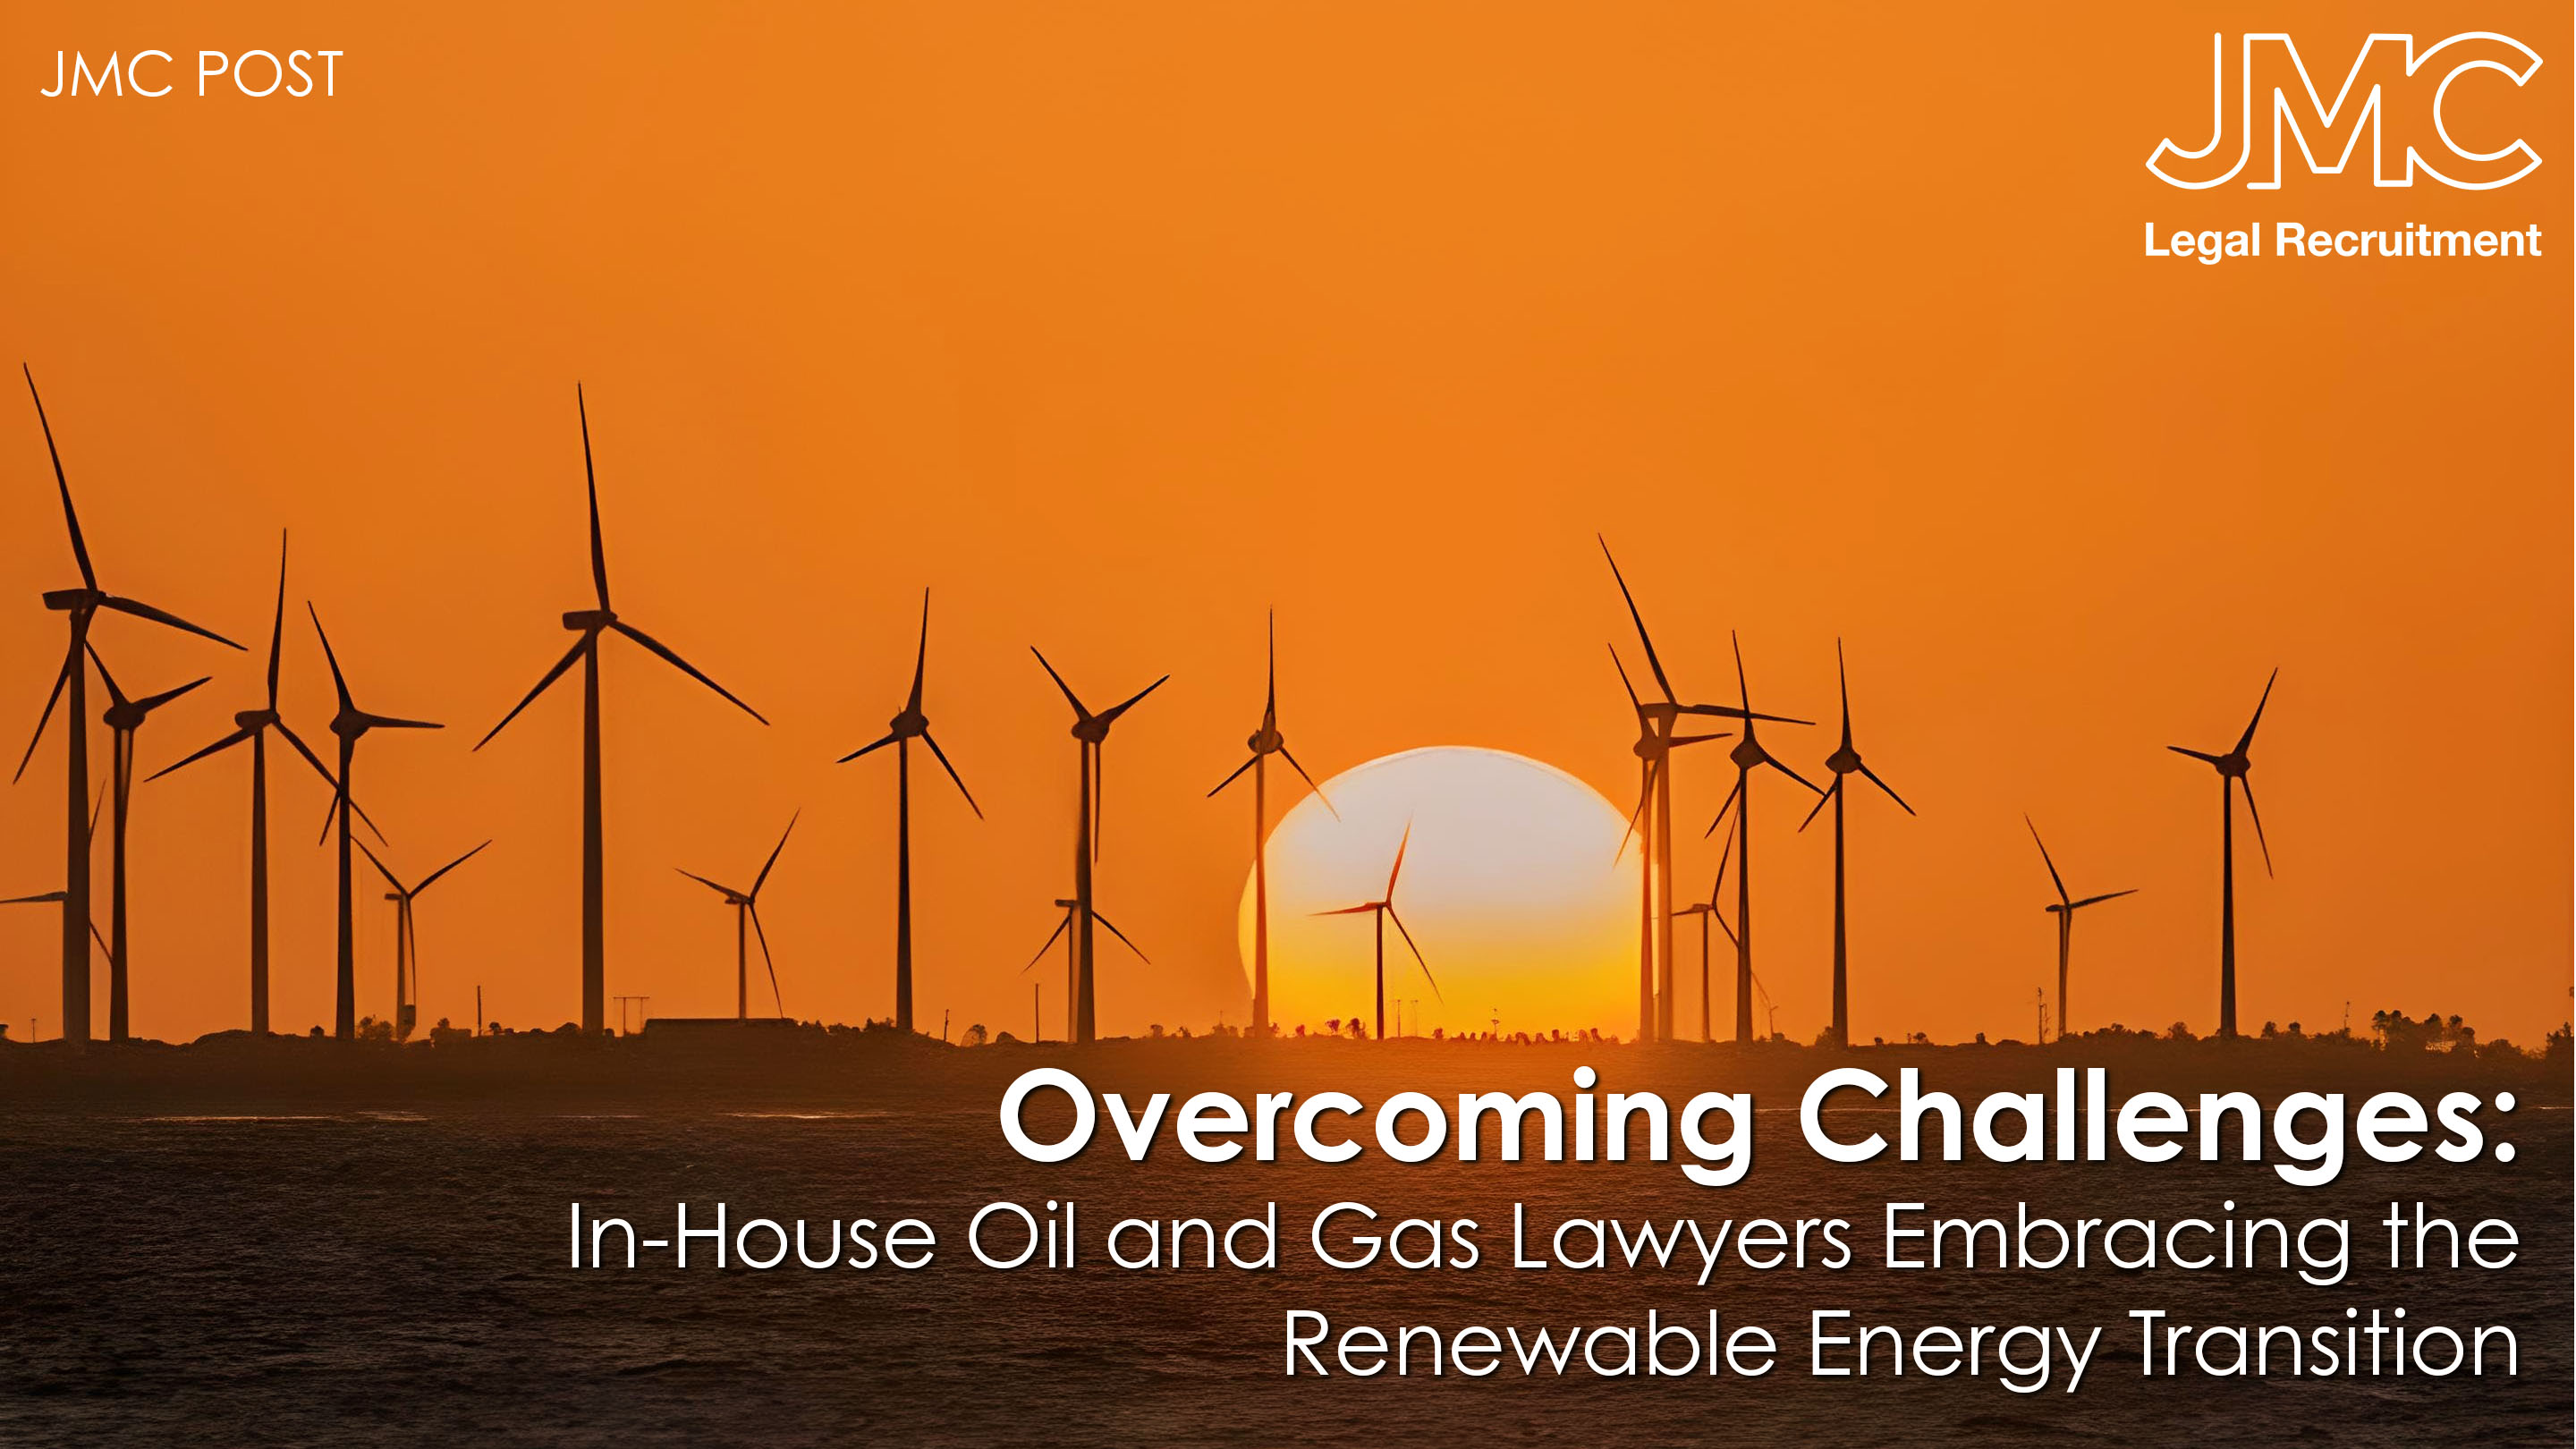 Overcoming Challenges: In-House Oil and Gas Lawyers Embracing the Renewable Energy Transition